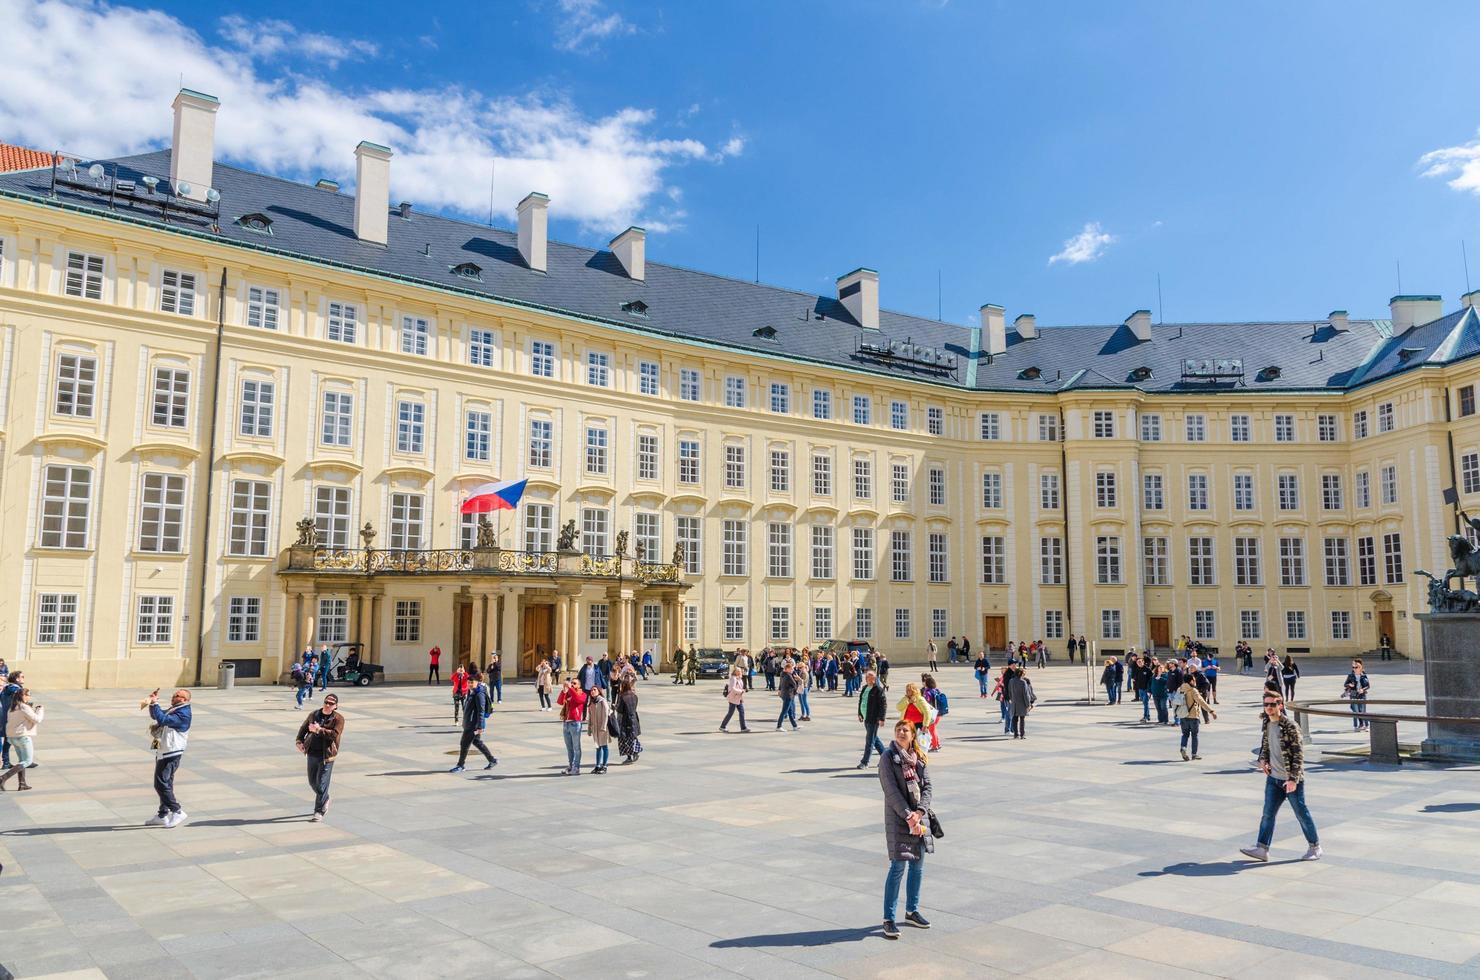 Prague, Czech Republic, May 13, 2019 courtyard square with The Archive of the Prague Castle and Old Royal Palace buildings, walking people tourists, Mala Strana Lesser Town, Bohemia photo